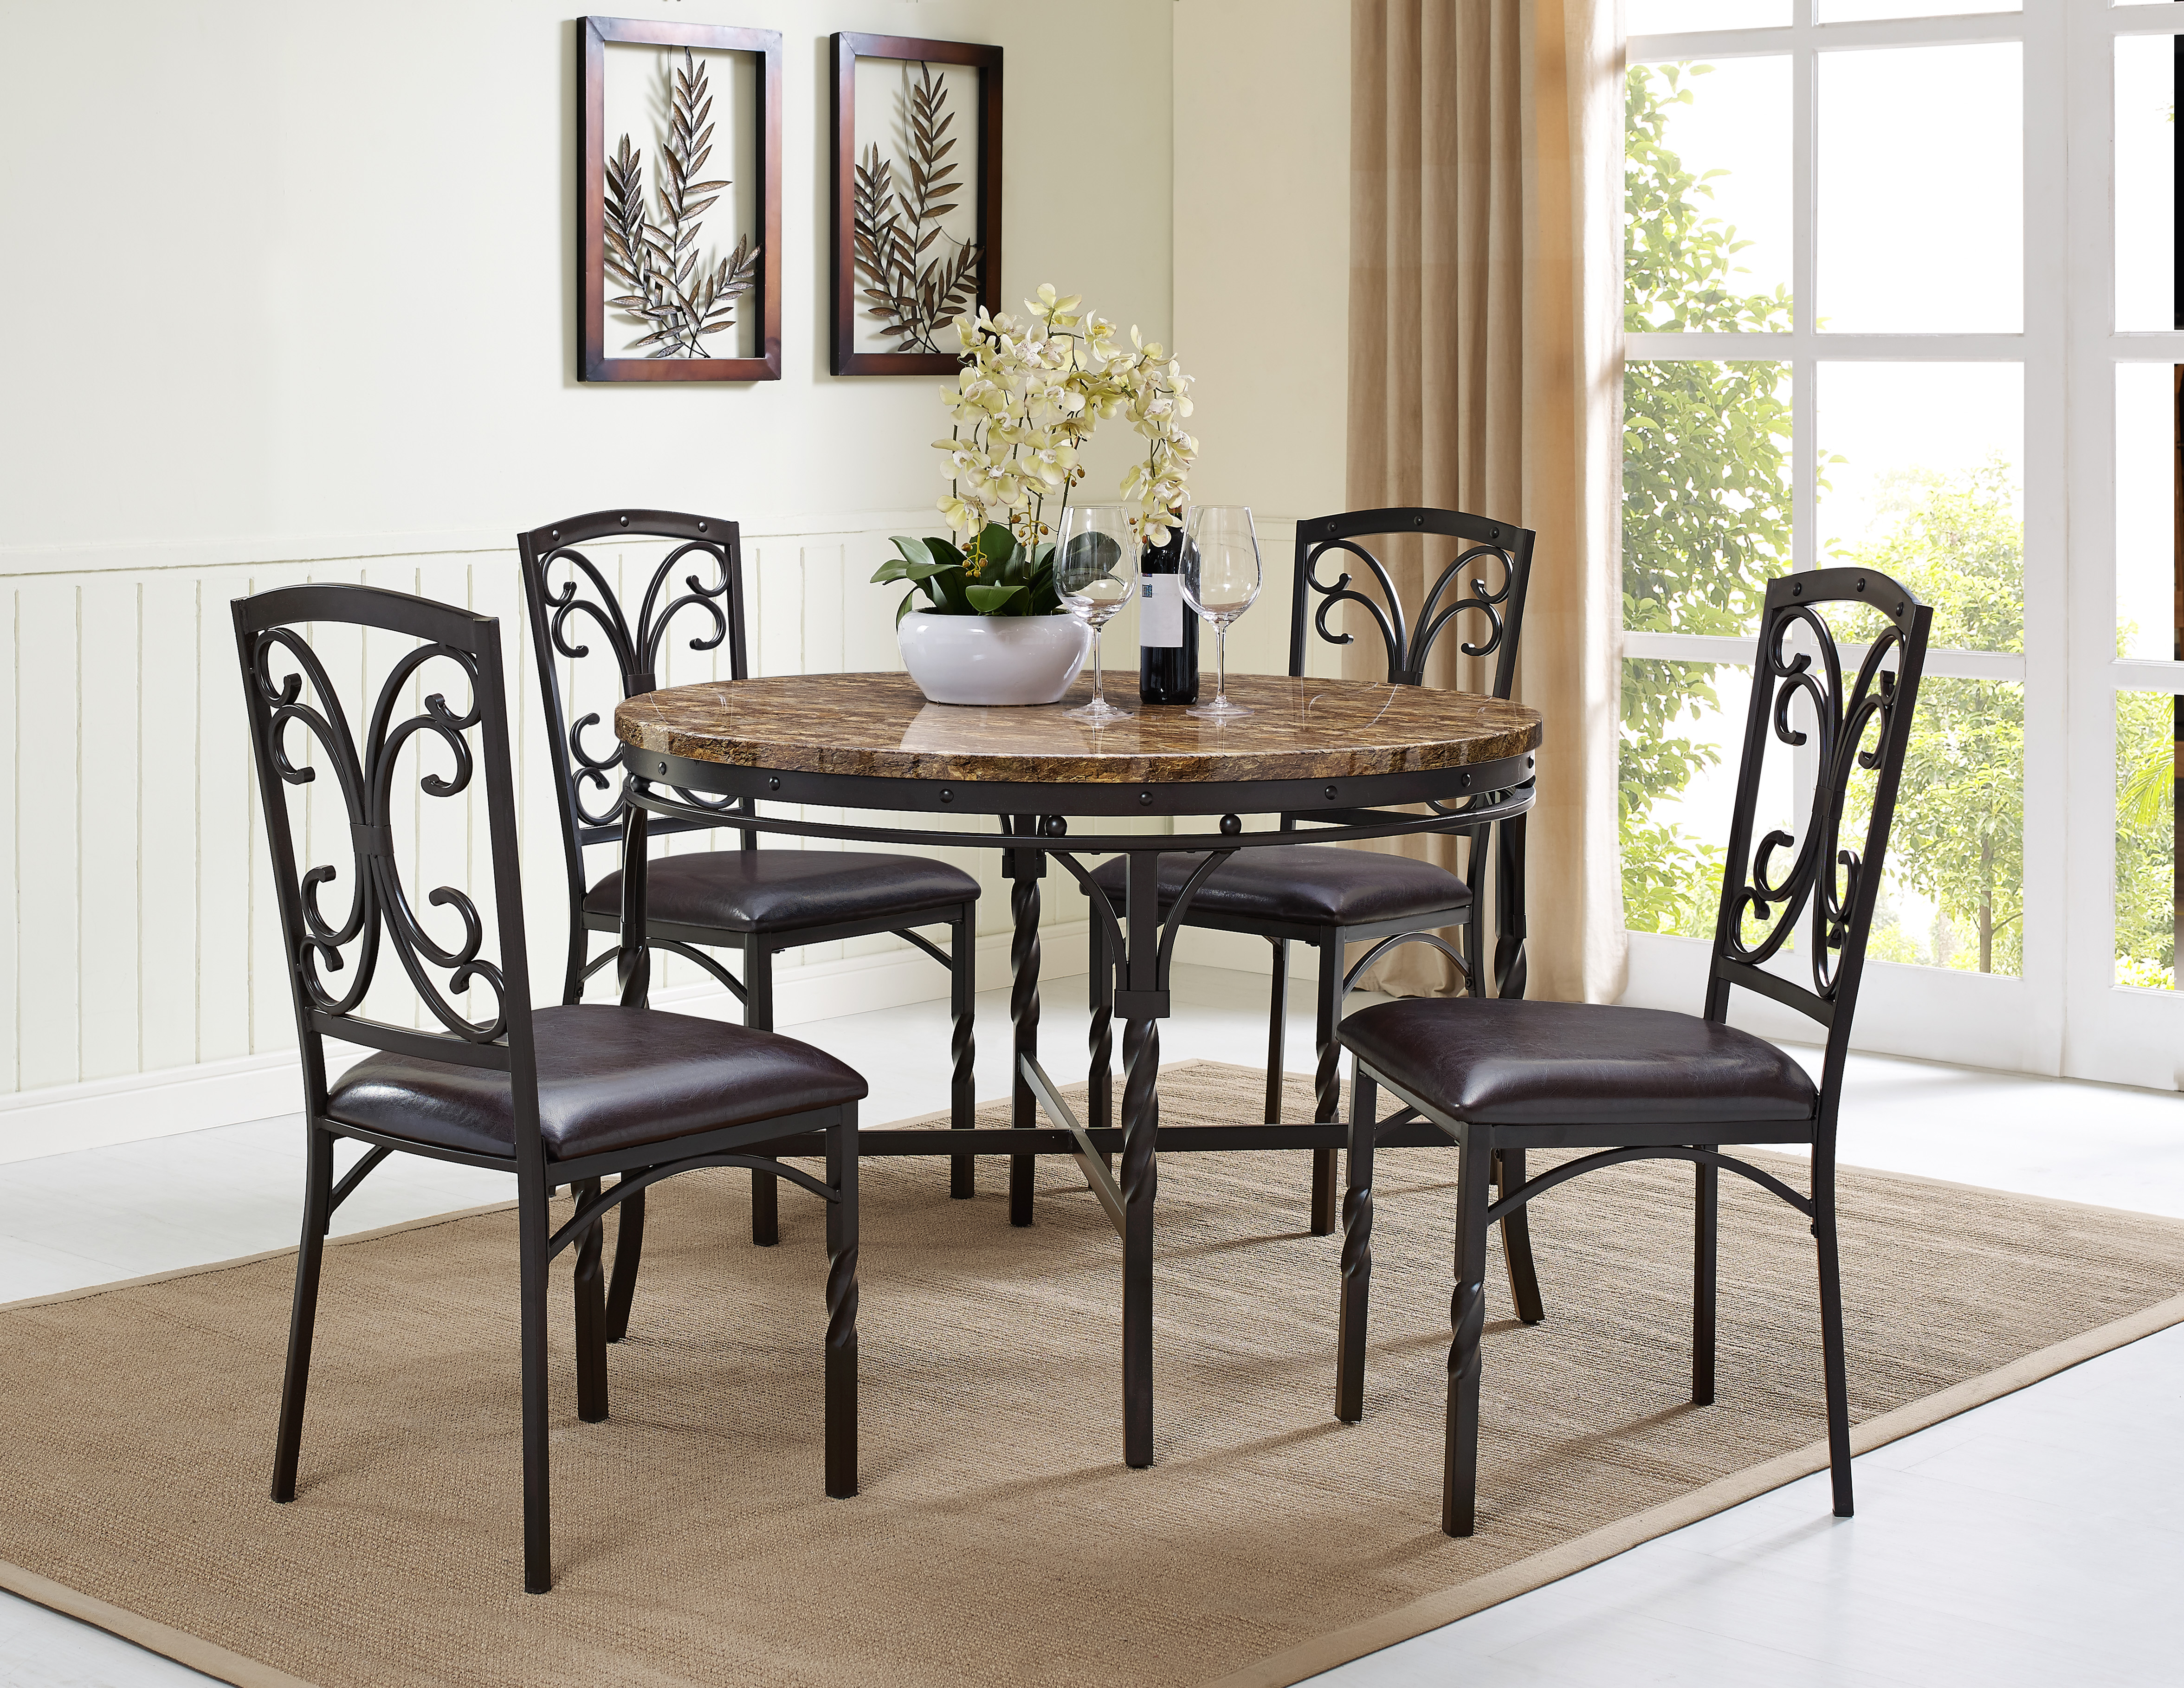 4550 Tuscan Copper Black Dining Table $549.99